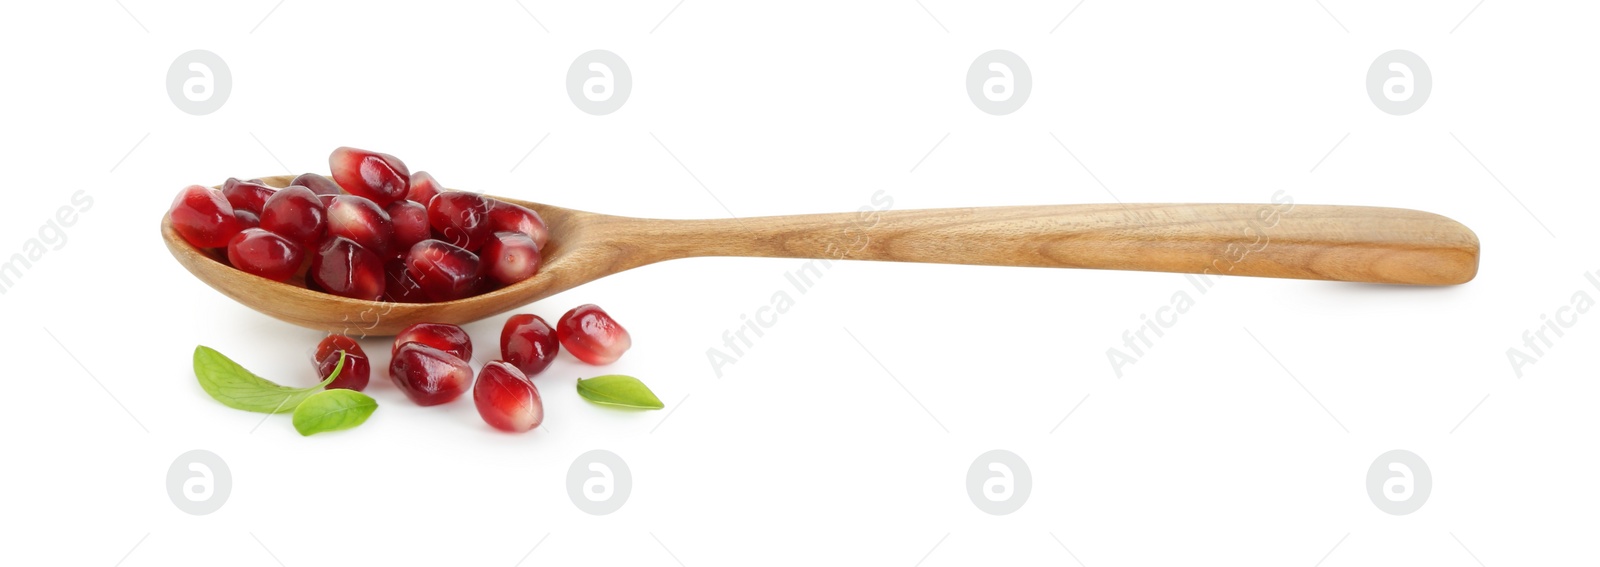 Photo of Ripe juicy pomegranate grains, leaves and wooden spoon isolated on white